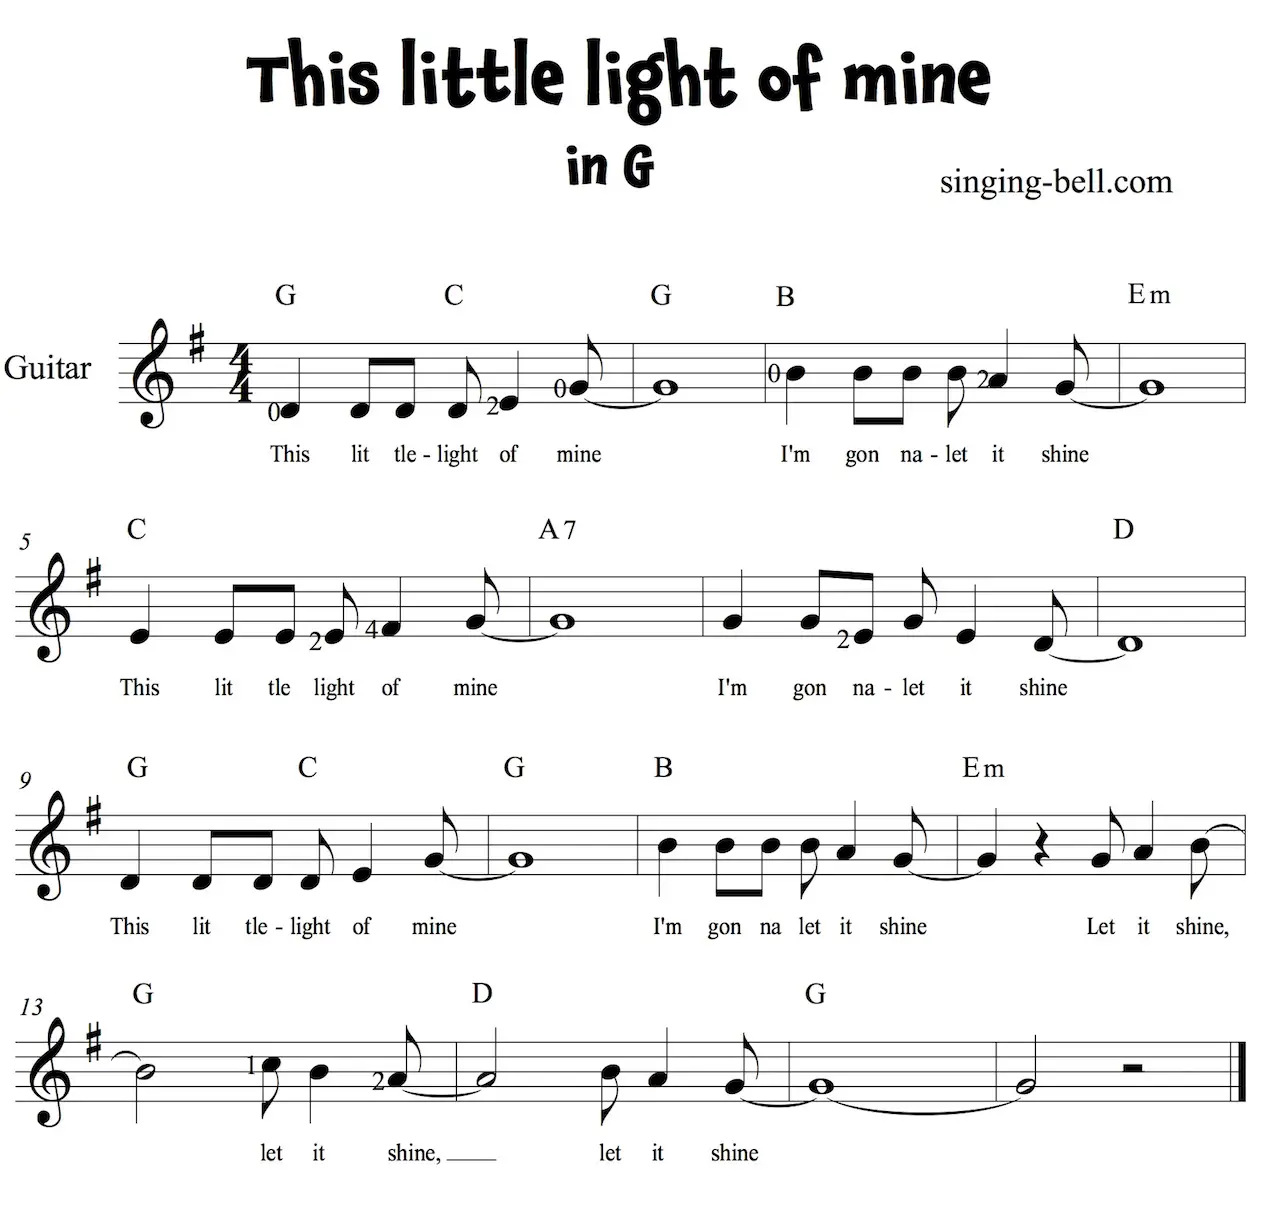 This little light of mine Easy Beginners Guitar Sheet Music with Chords in G major.